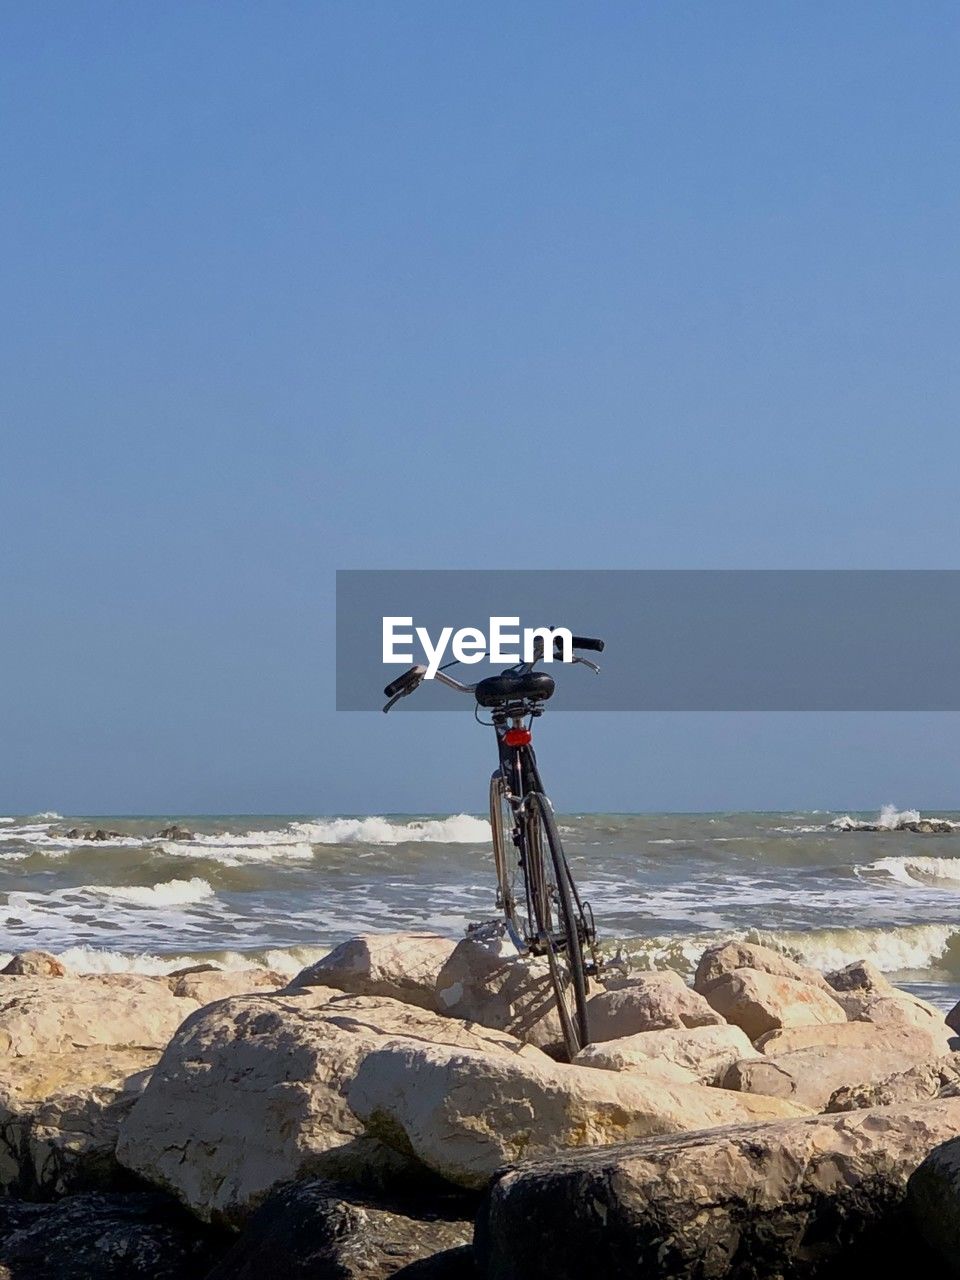 water, bicycle, sky, sea, vehicle, land, beach, nature, clear sky, coast, transportation, rock, copy space, horizon, day, horizon over water, sports, mode of transportation, sports equipment, sunny, mountain bike, ocean, motion, scenics - nature, sunlight, blue, travel, land vehicle, beauty in nature, outdoors, no people, activity, travel destinations, tranquility, extreme sports